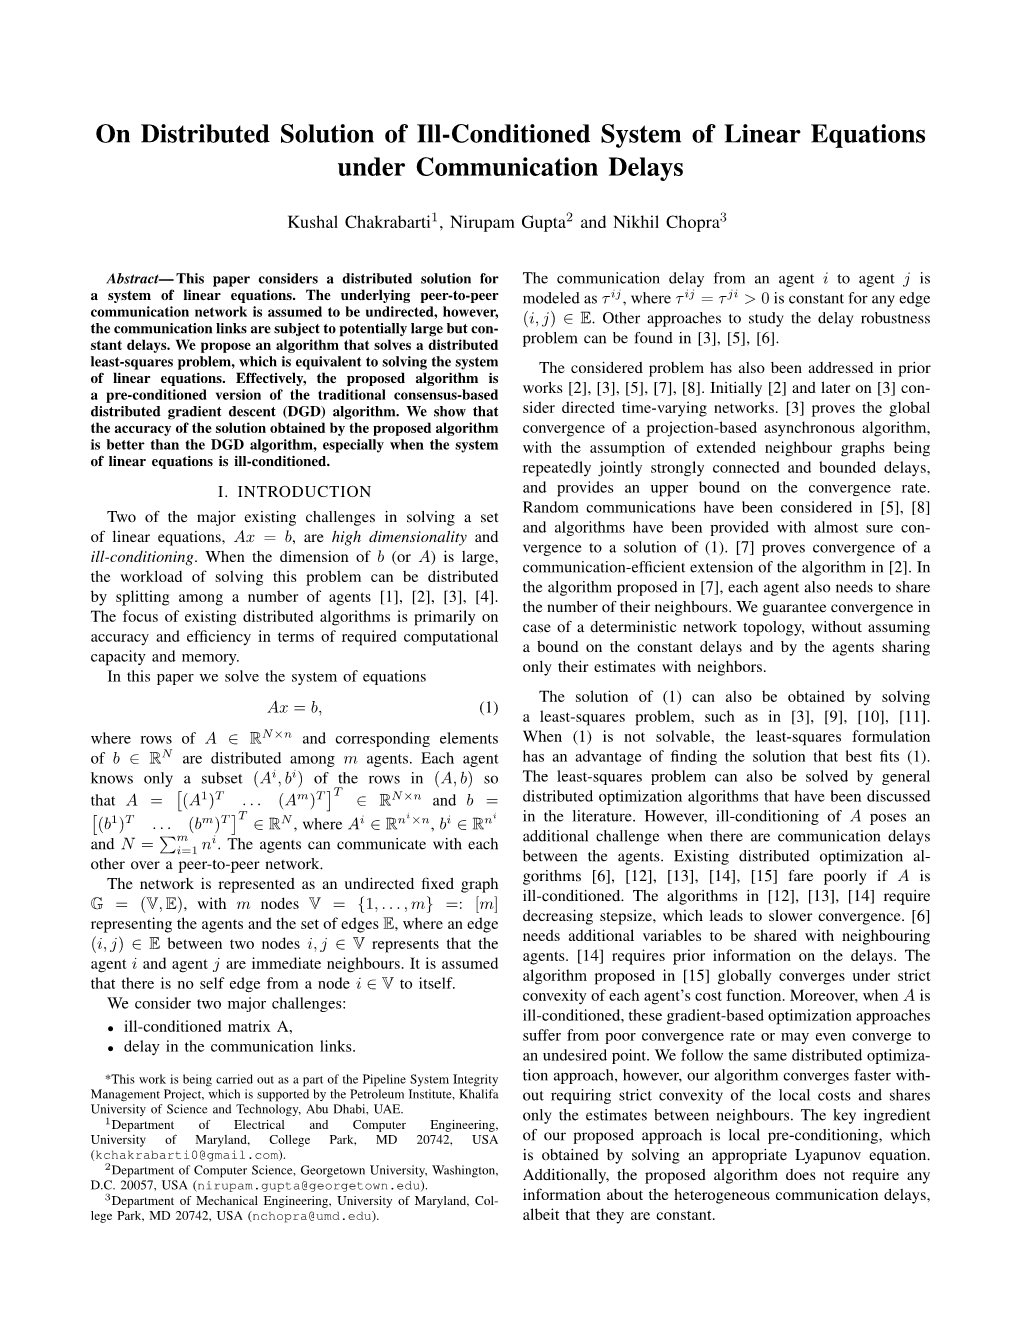 On Distributed Solution of Ill-Conditioned System of Linear Equations Under Communication Delays